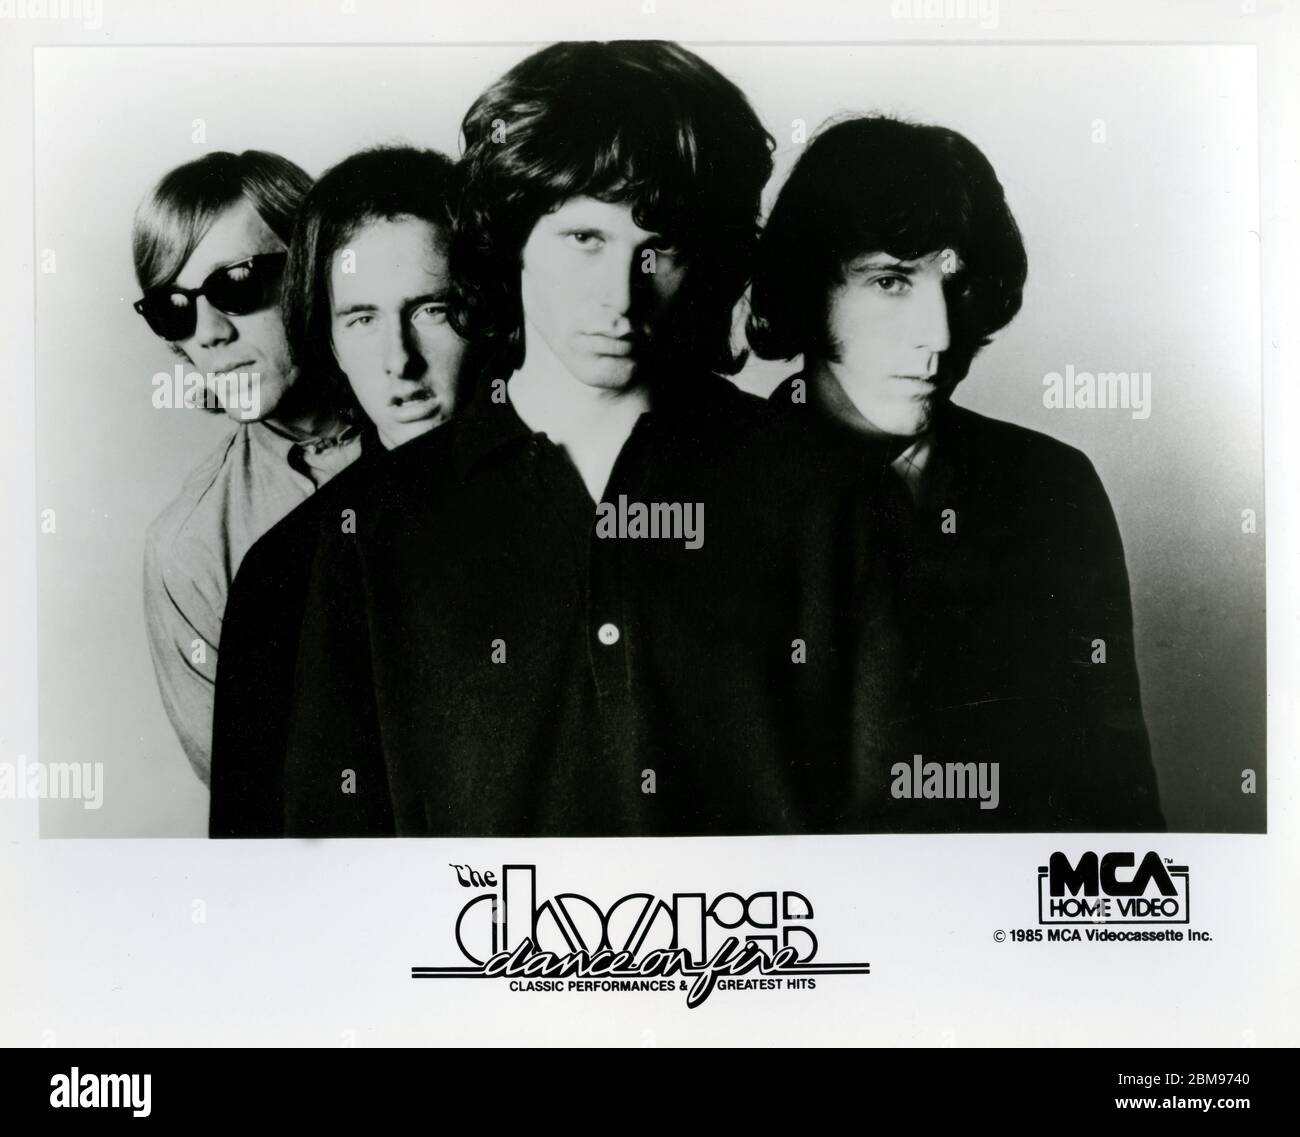 Publicity photo for The Doors, Dance on Fire, video casstte of classic performances and greatest hits on MCA Home Video circa 1985 Stock Photo